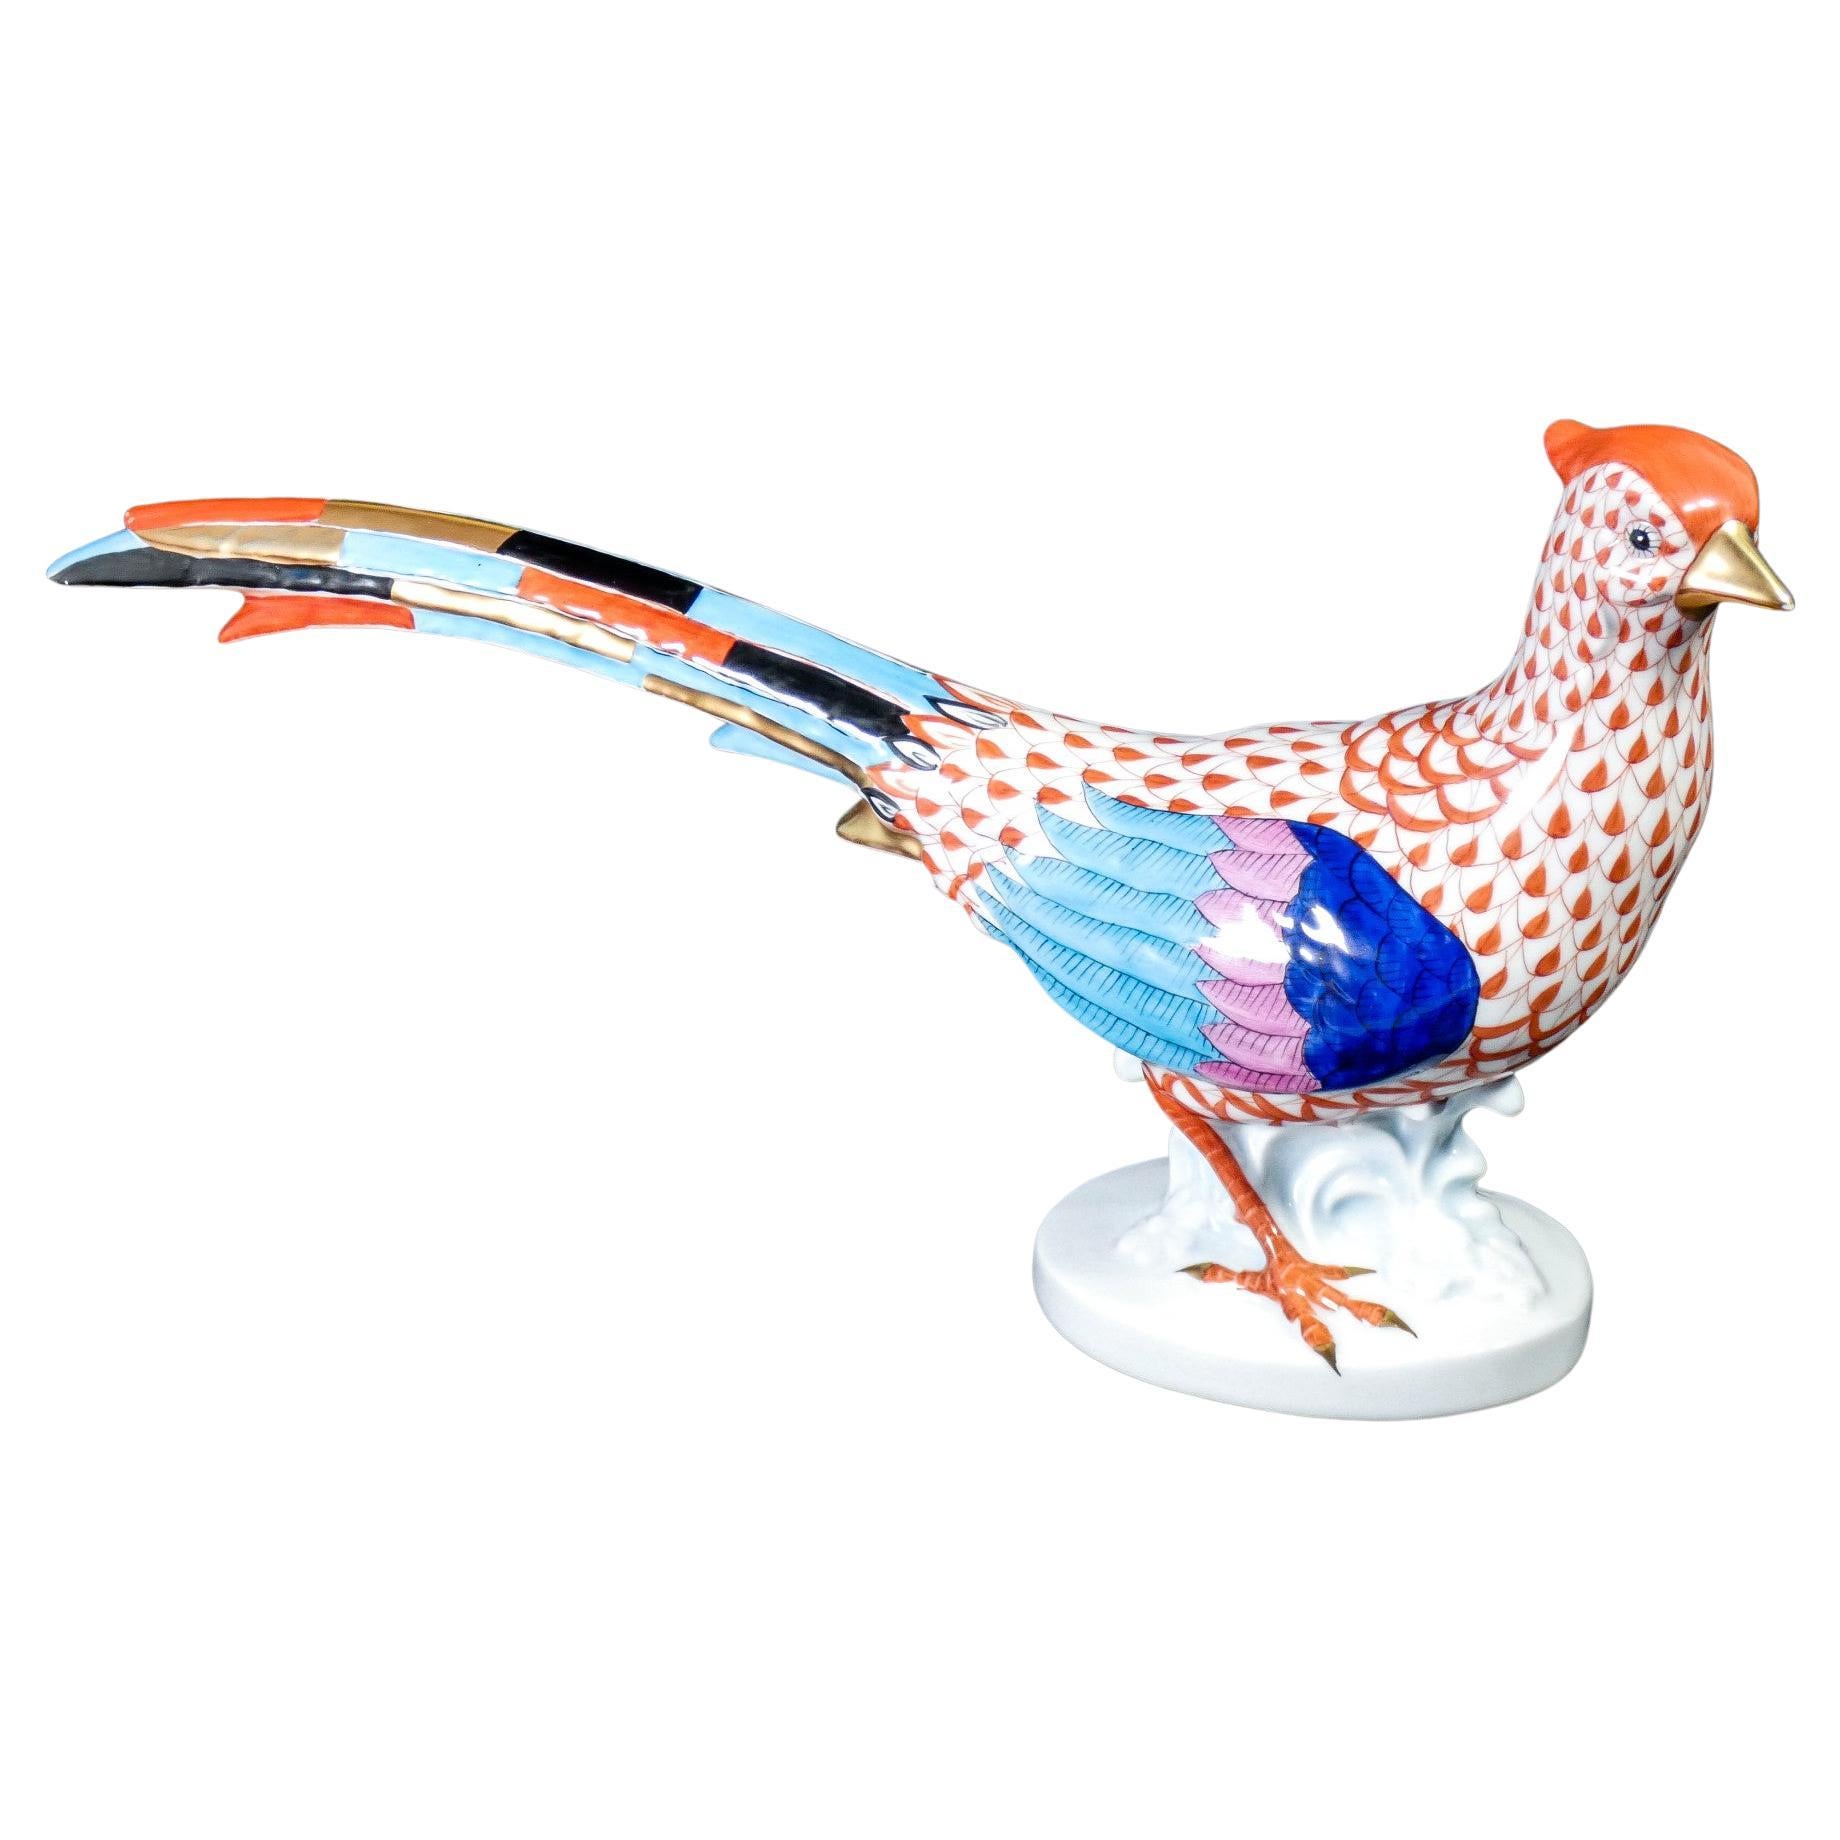 HEREND hand painted "Pheasant" in the typical fishnet style. Hungary, 20th c.